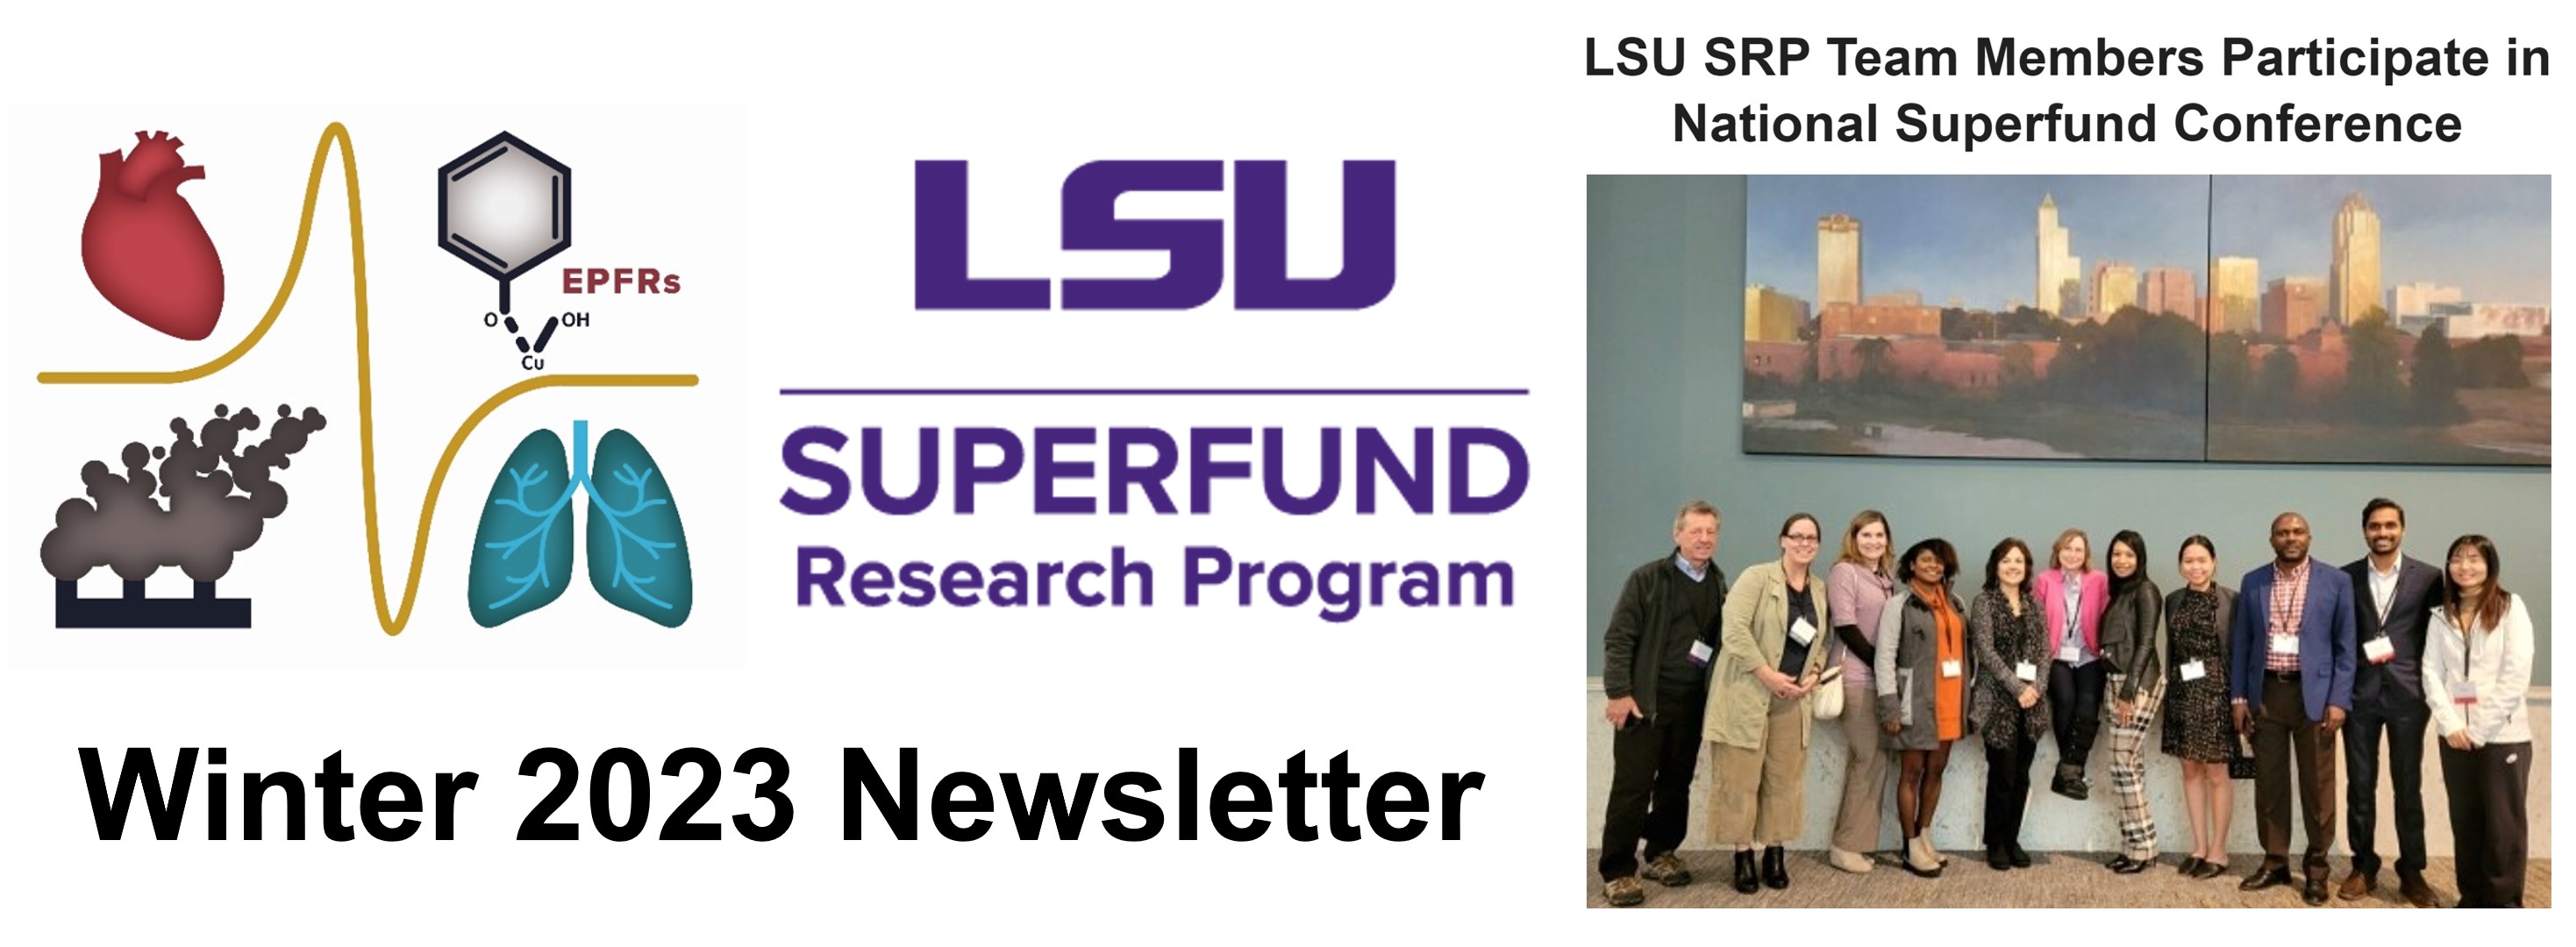 Image with the LSU SRP Logo